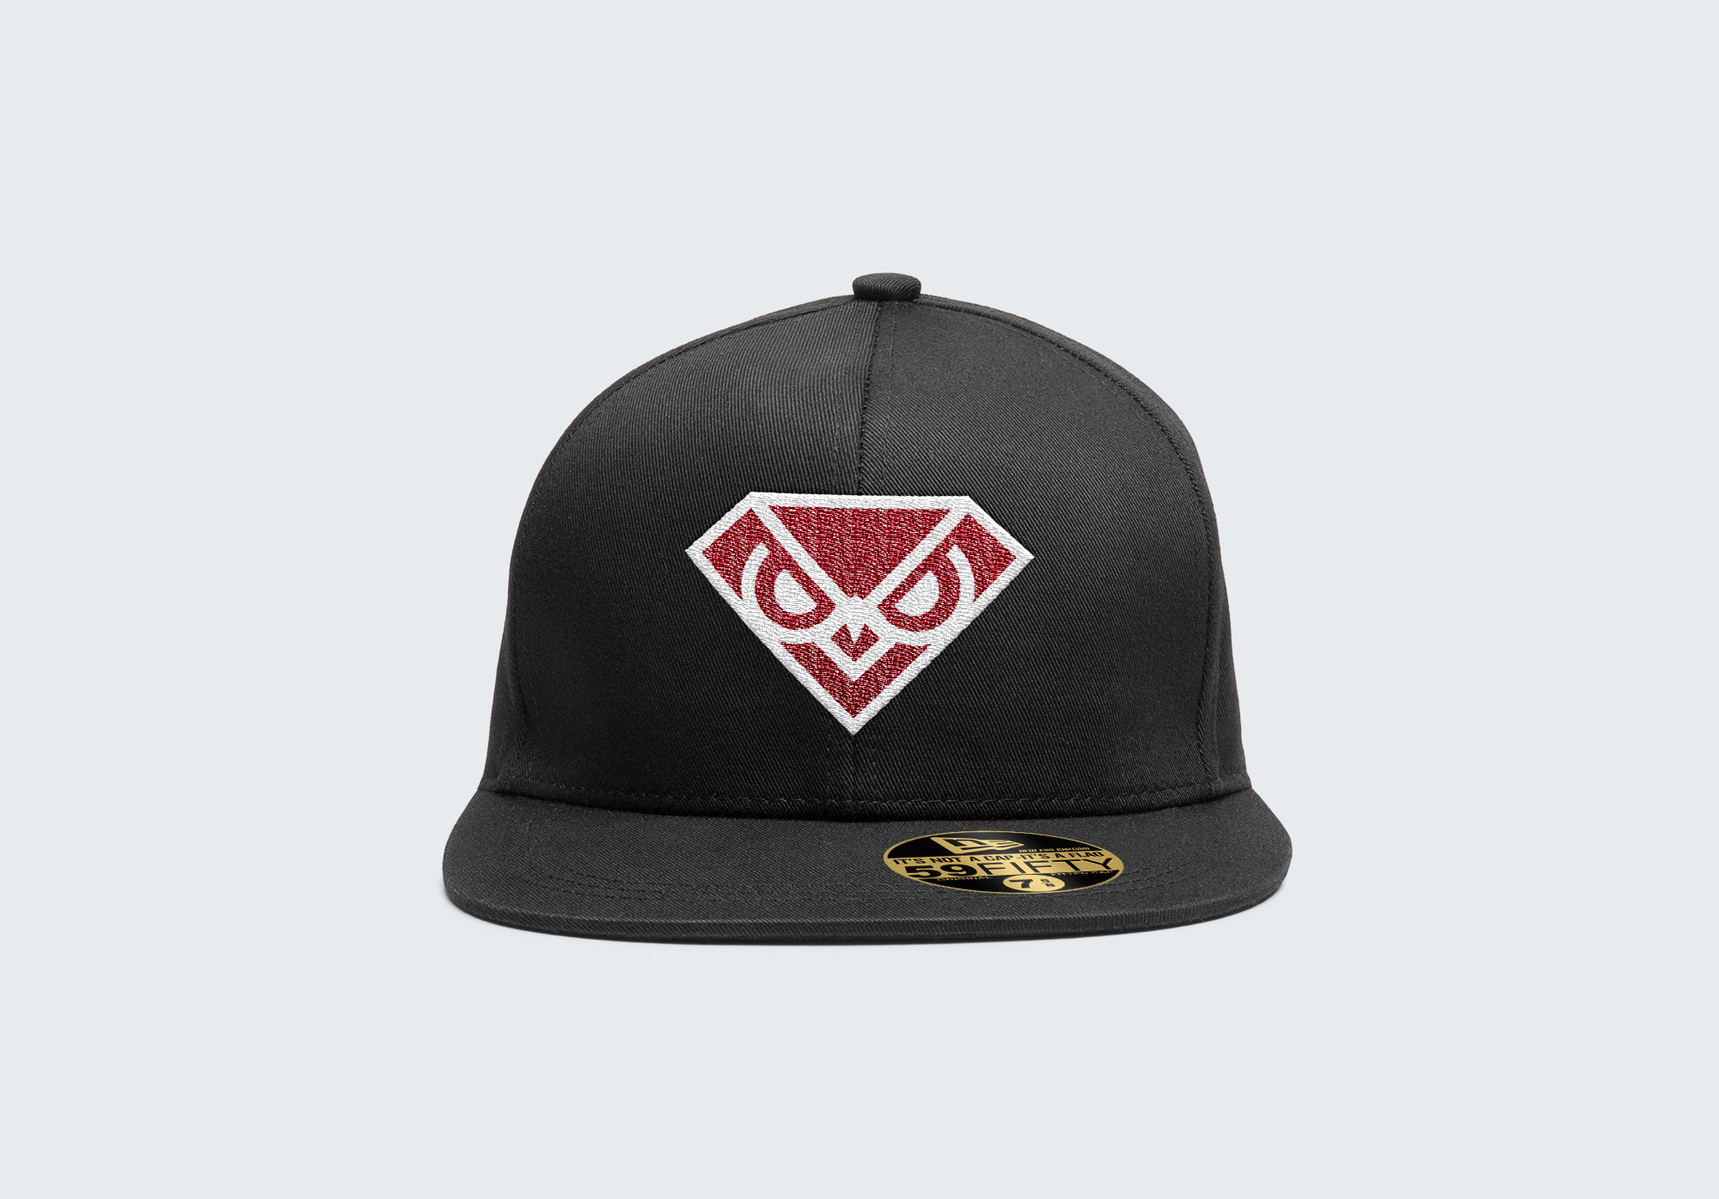 Proposed Temple Owl logo on hat